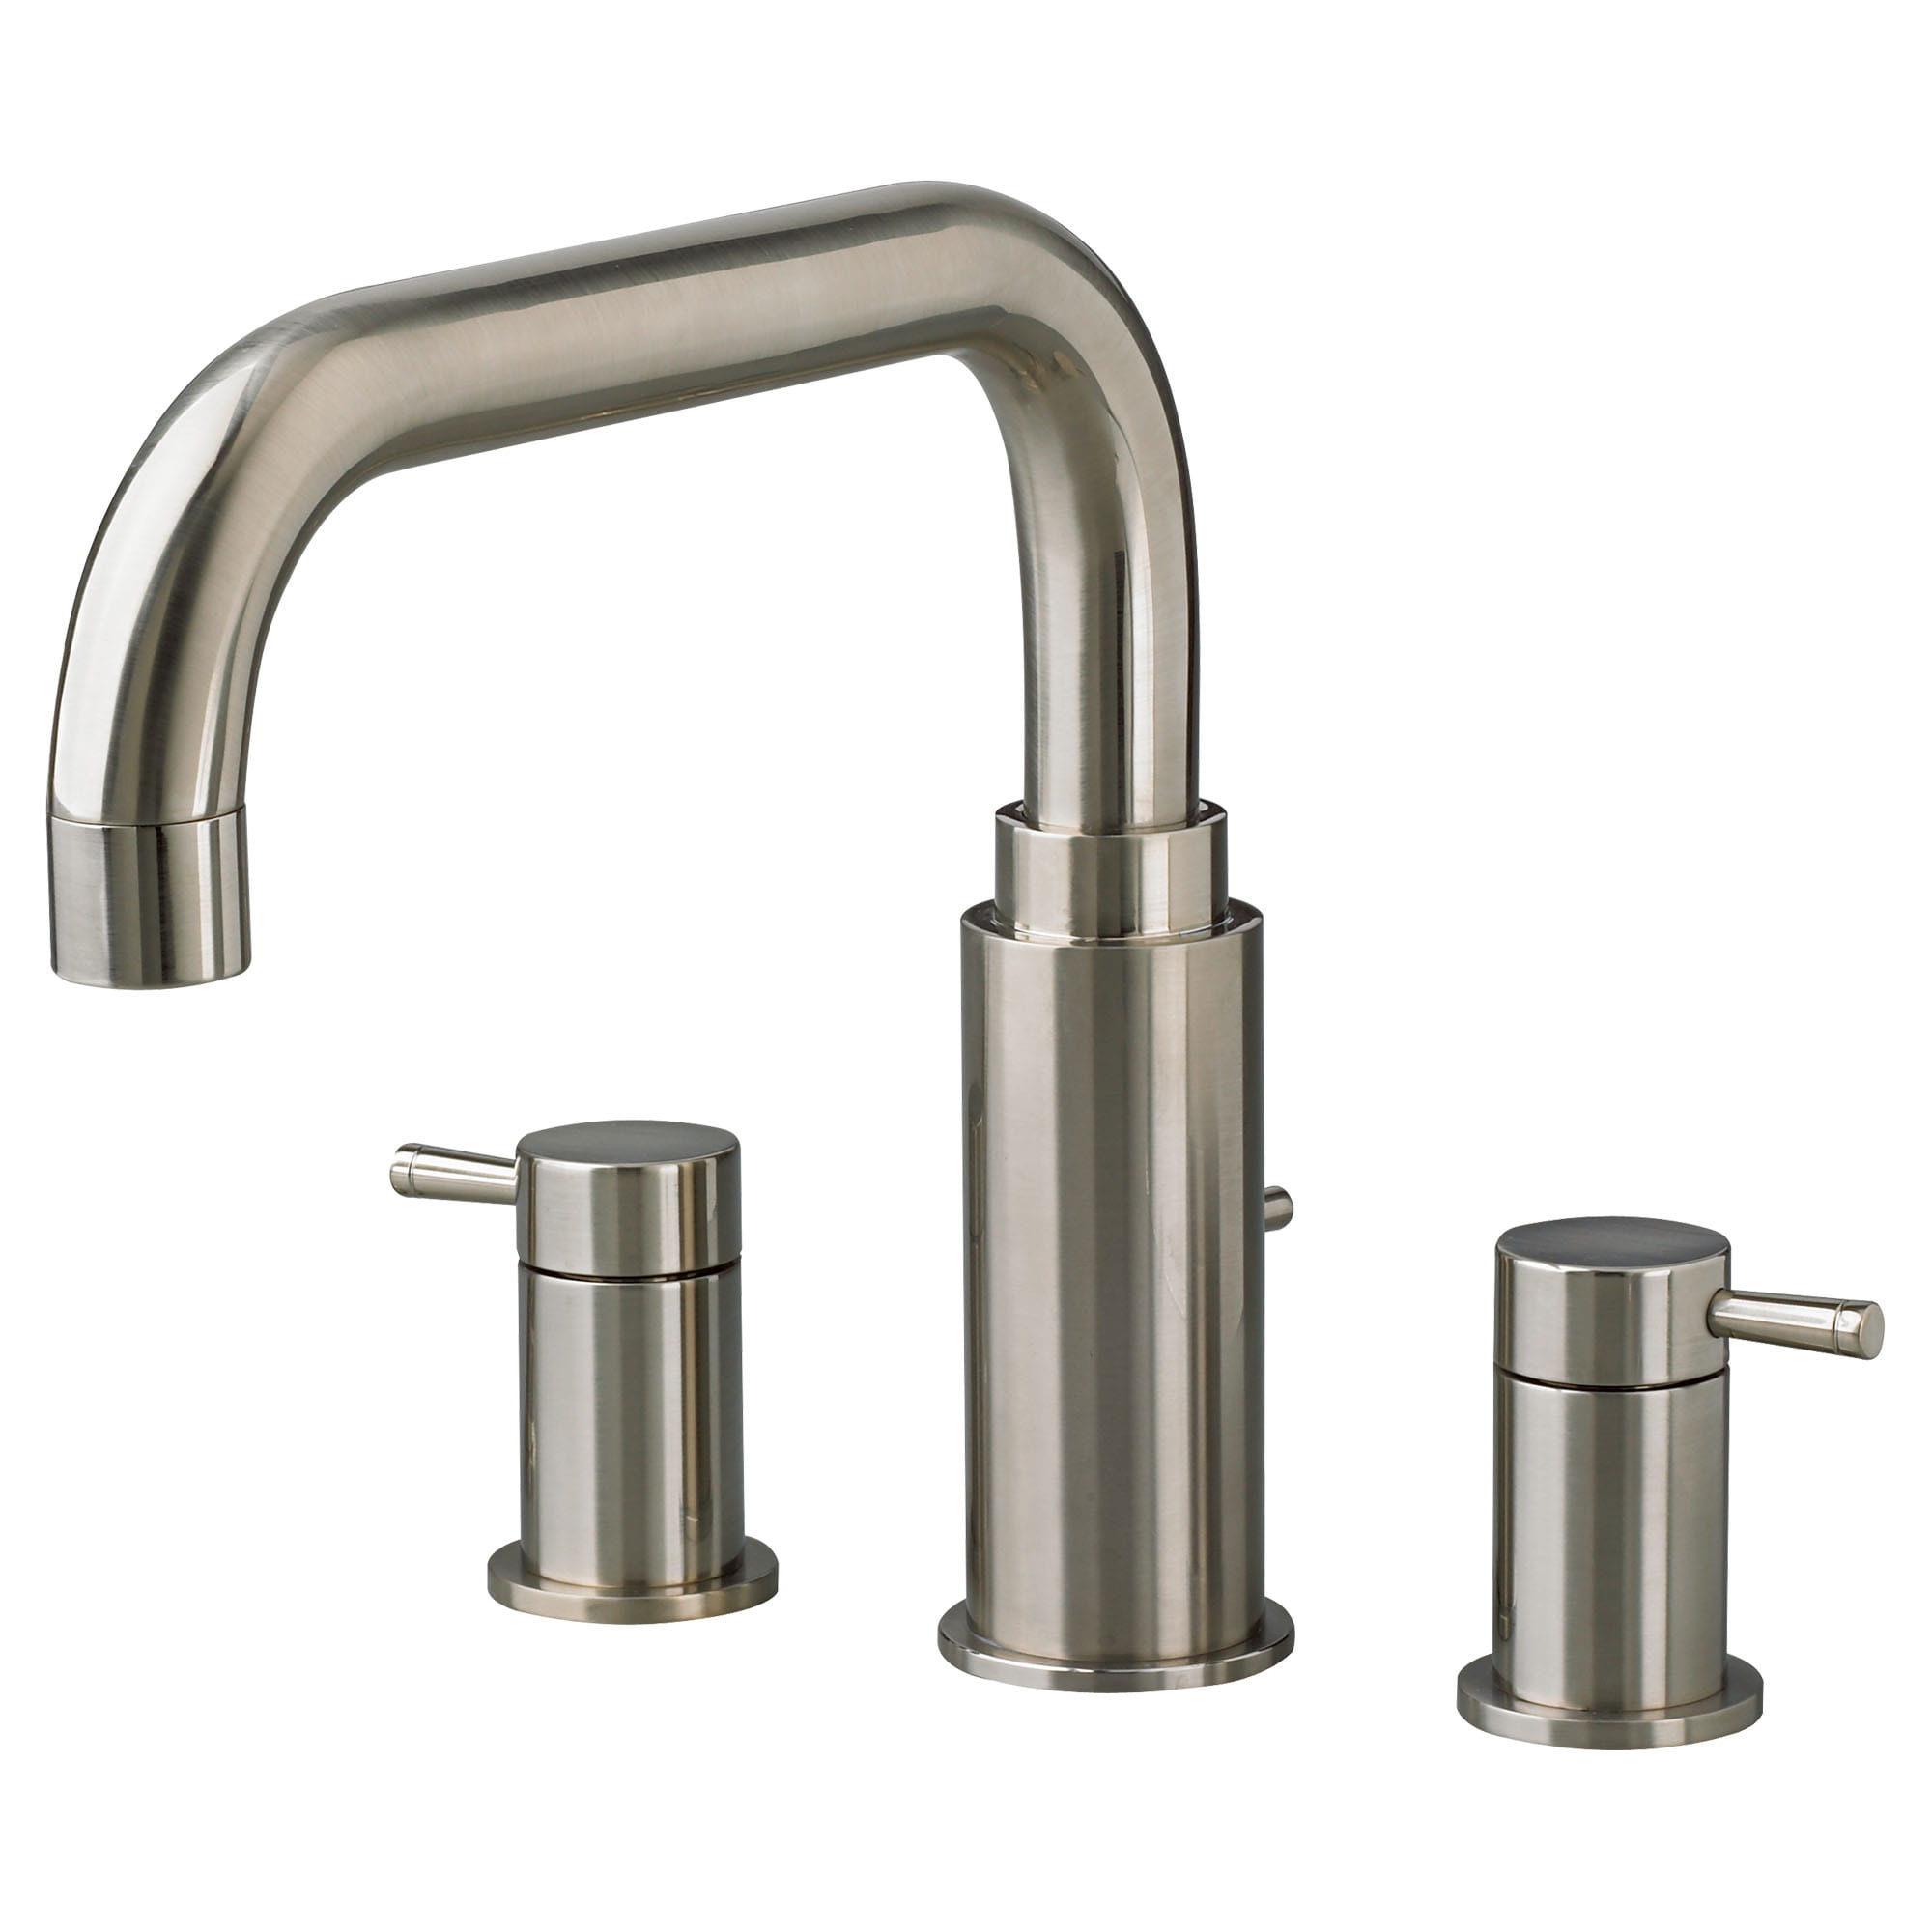 Serin® Bathtub Faucet With Lever Handles for Flash® Rough-In Valve